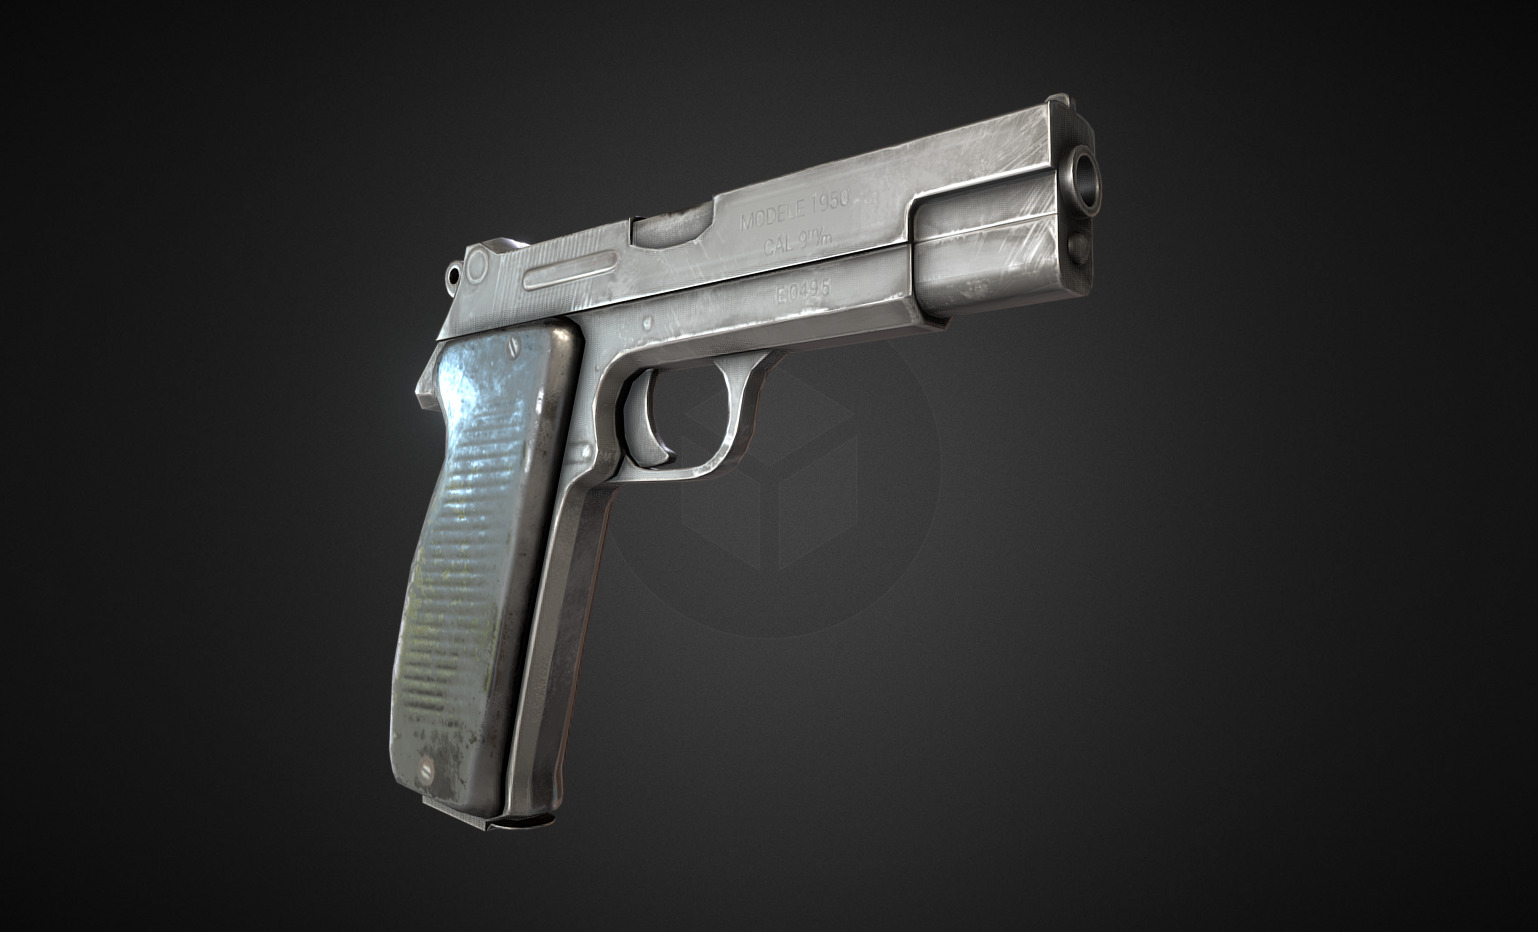 The MAC 50 was semi-automatic pistol of the French army.

Modeled with Blender. Textured with Substance painter &amp; Substance designer

All rights reserved - Pierre Bourgerie - MAC modèle 1950 - 3D model by Pierre Bourgerie (@pierrebourgerie) 3d model